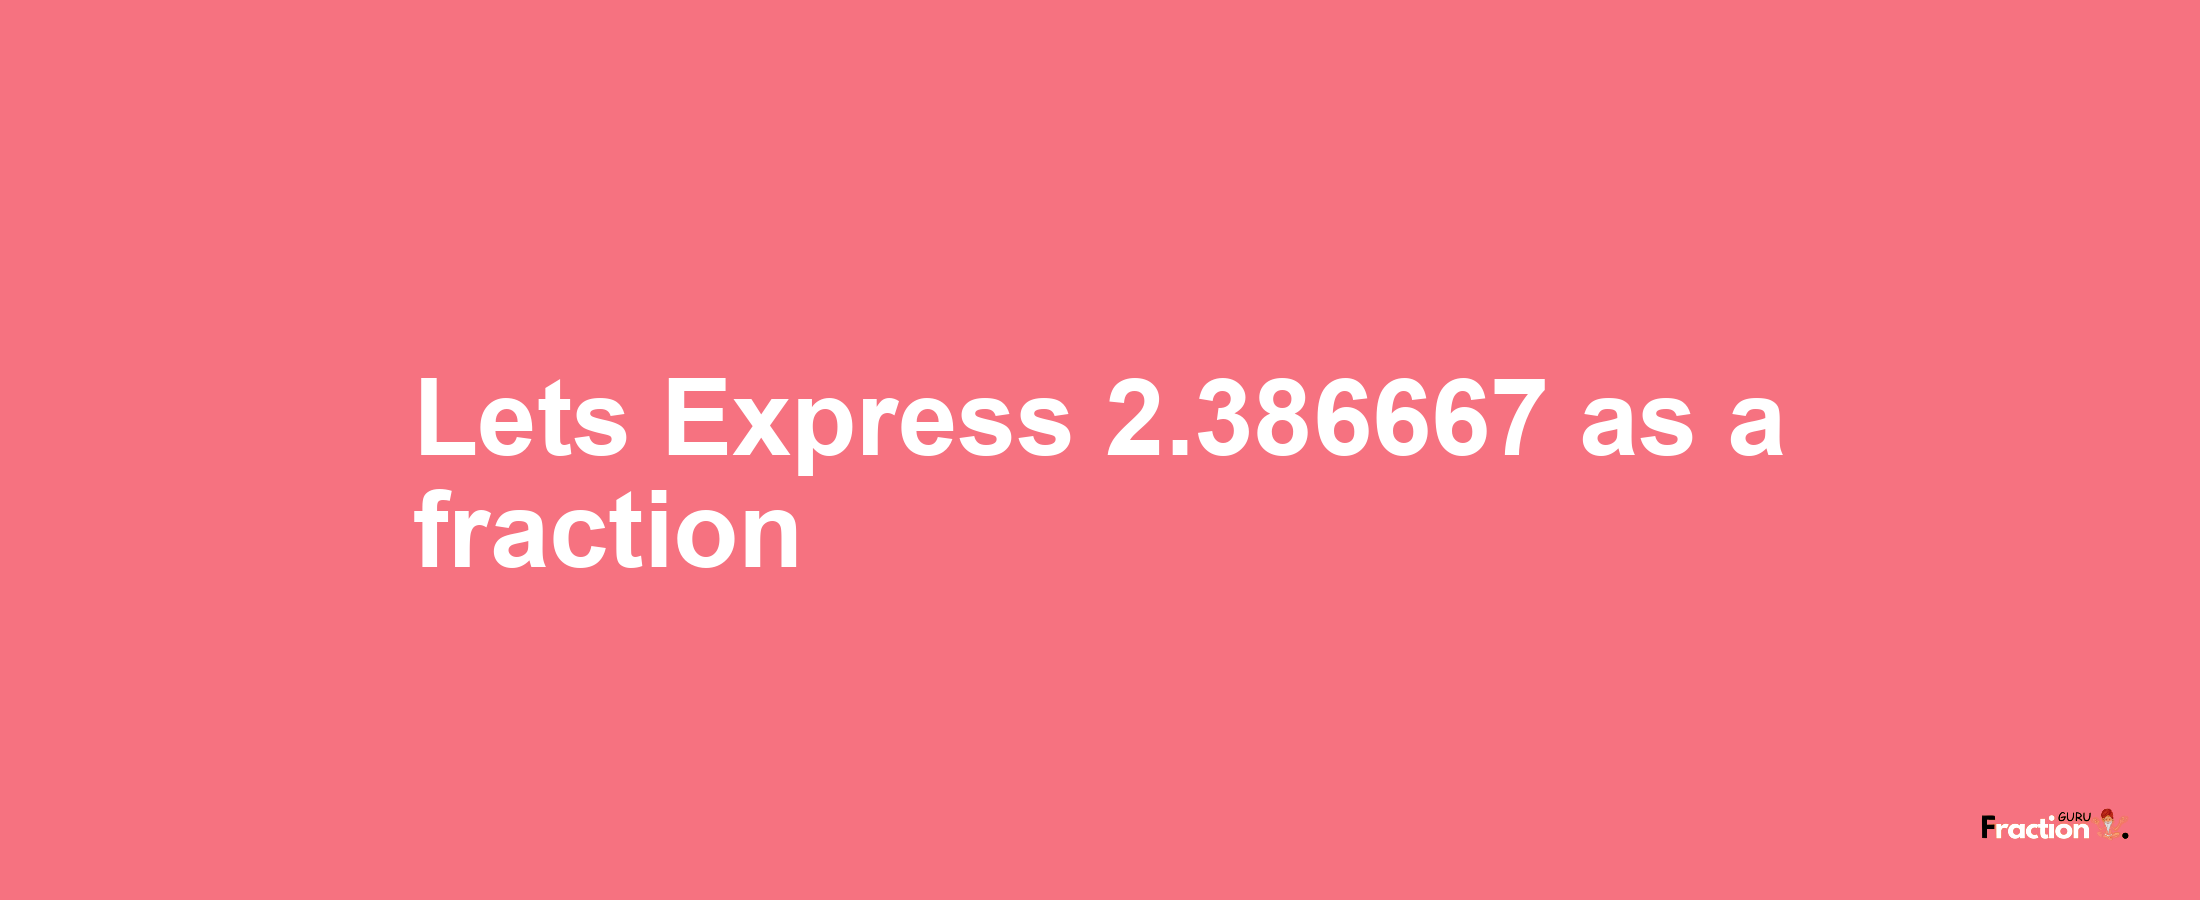 Lets Express 2.386667 as afraction